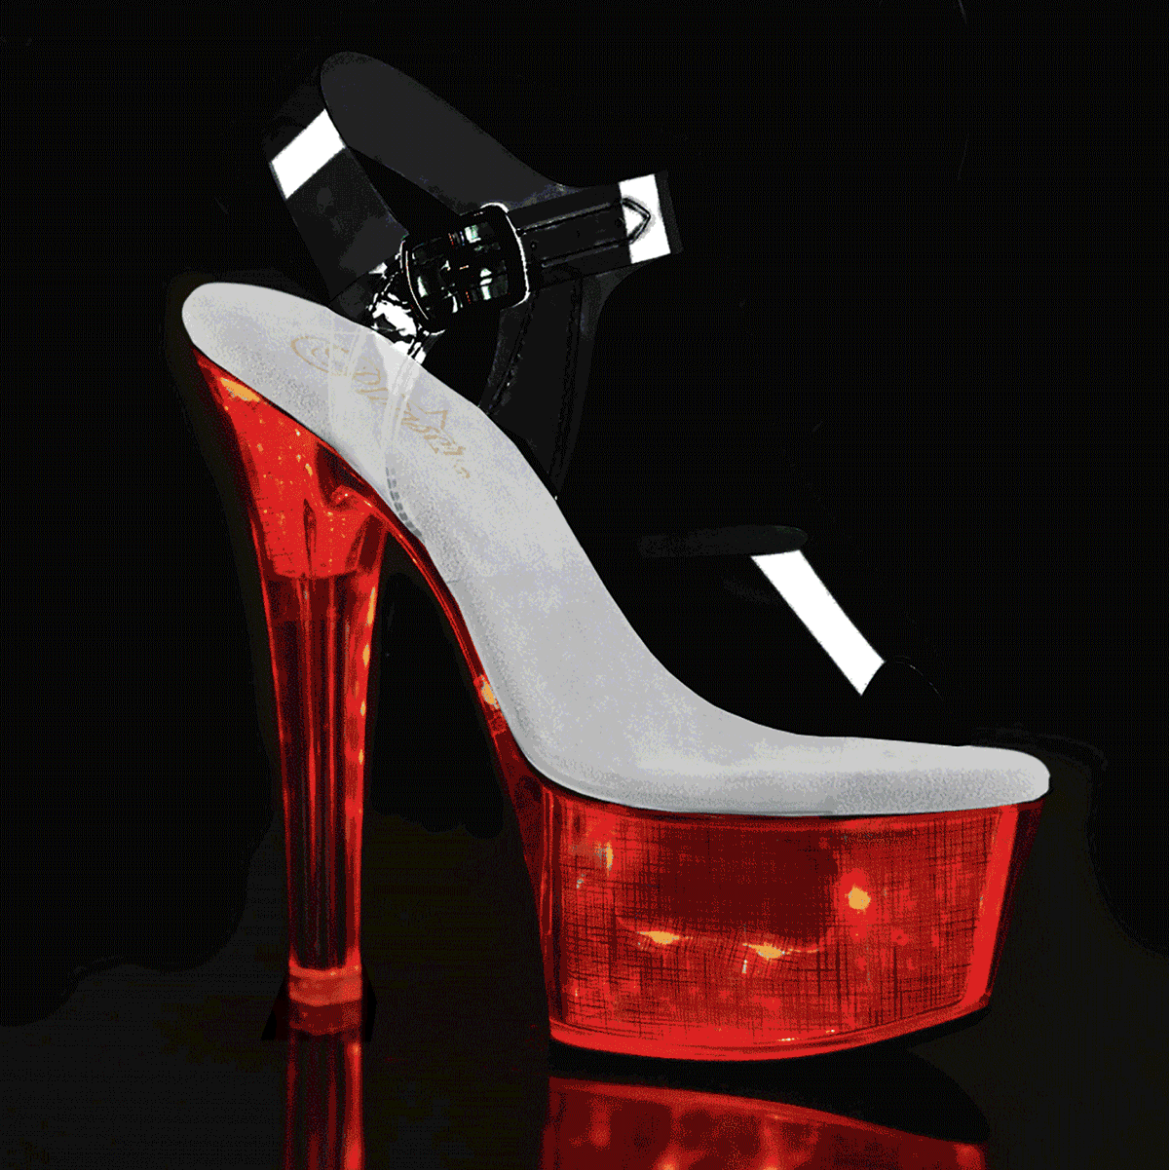 Product image of Pleaser Flashdance-608Ch Clear/Silver Hologram, 6 inch (15.2 cm) Heel, 2 1/4 inch (5.7 cm) Platform Sandal Shoes